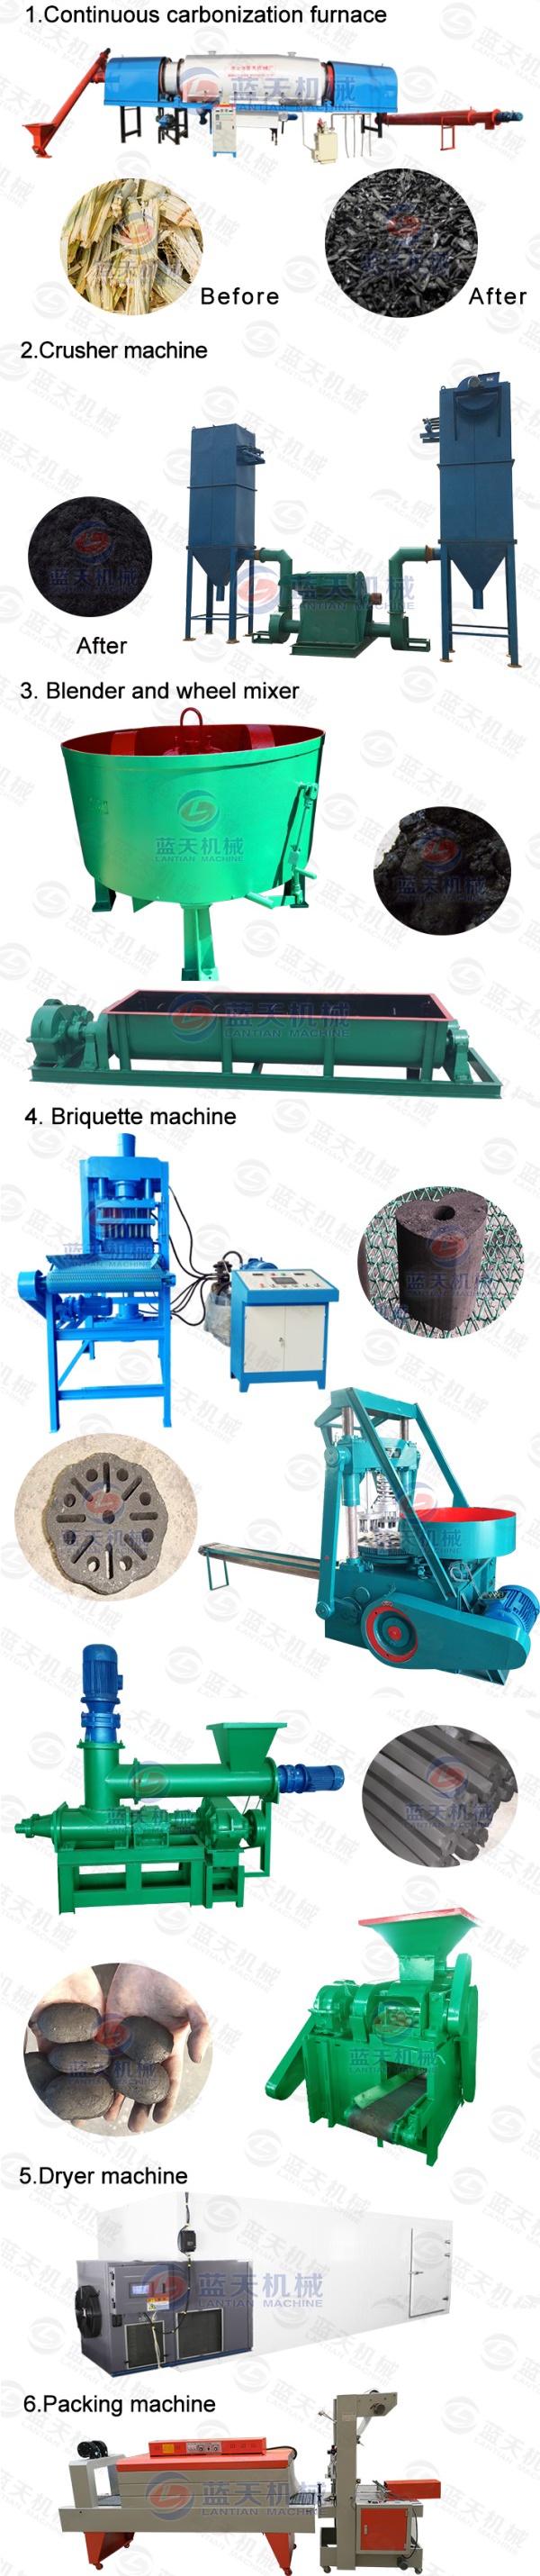 Product line of industrial dryer